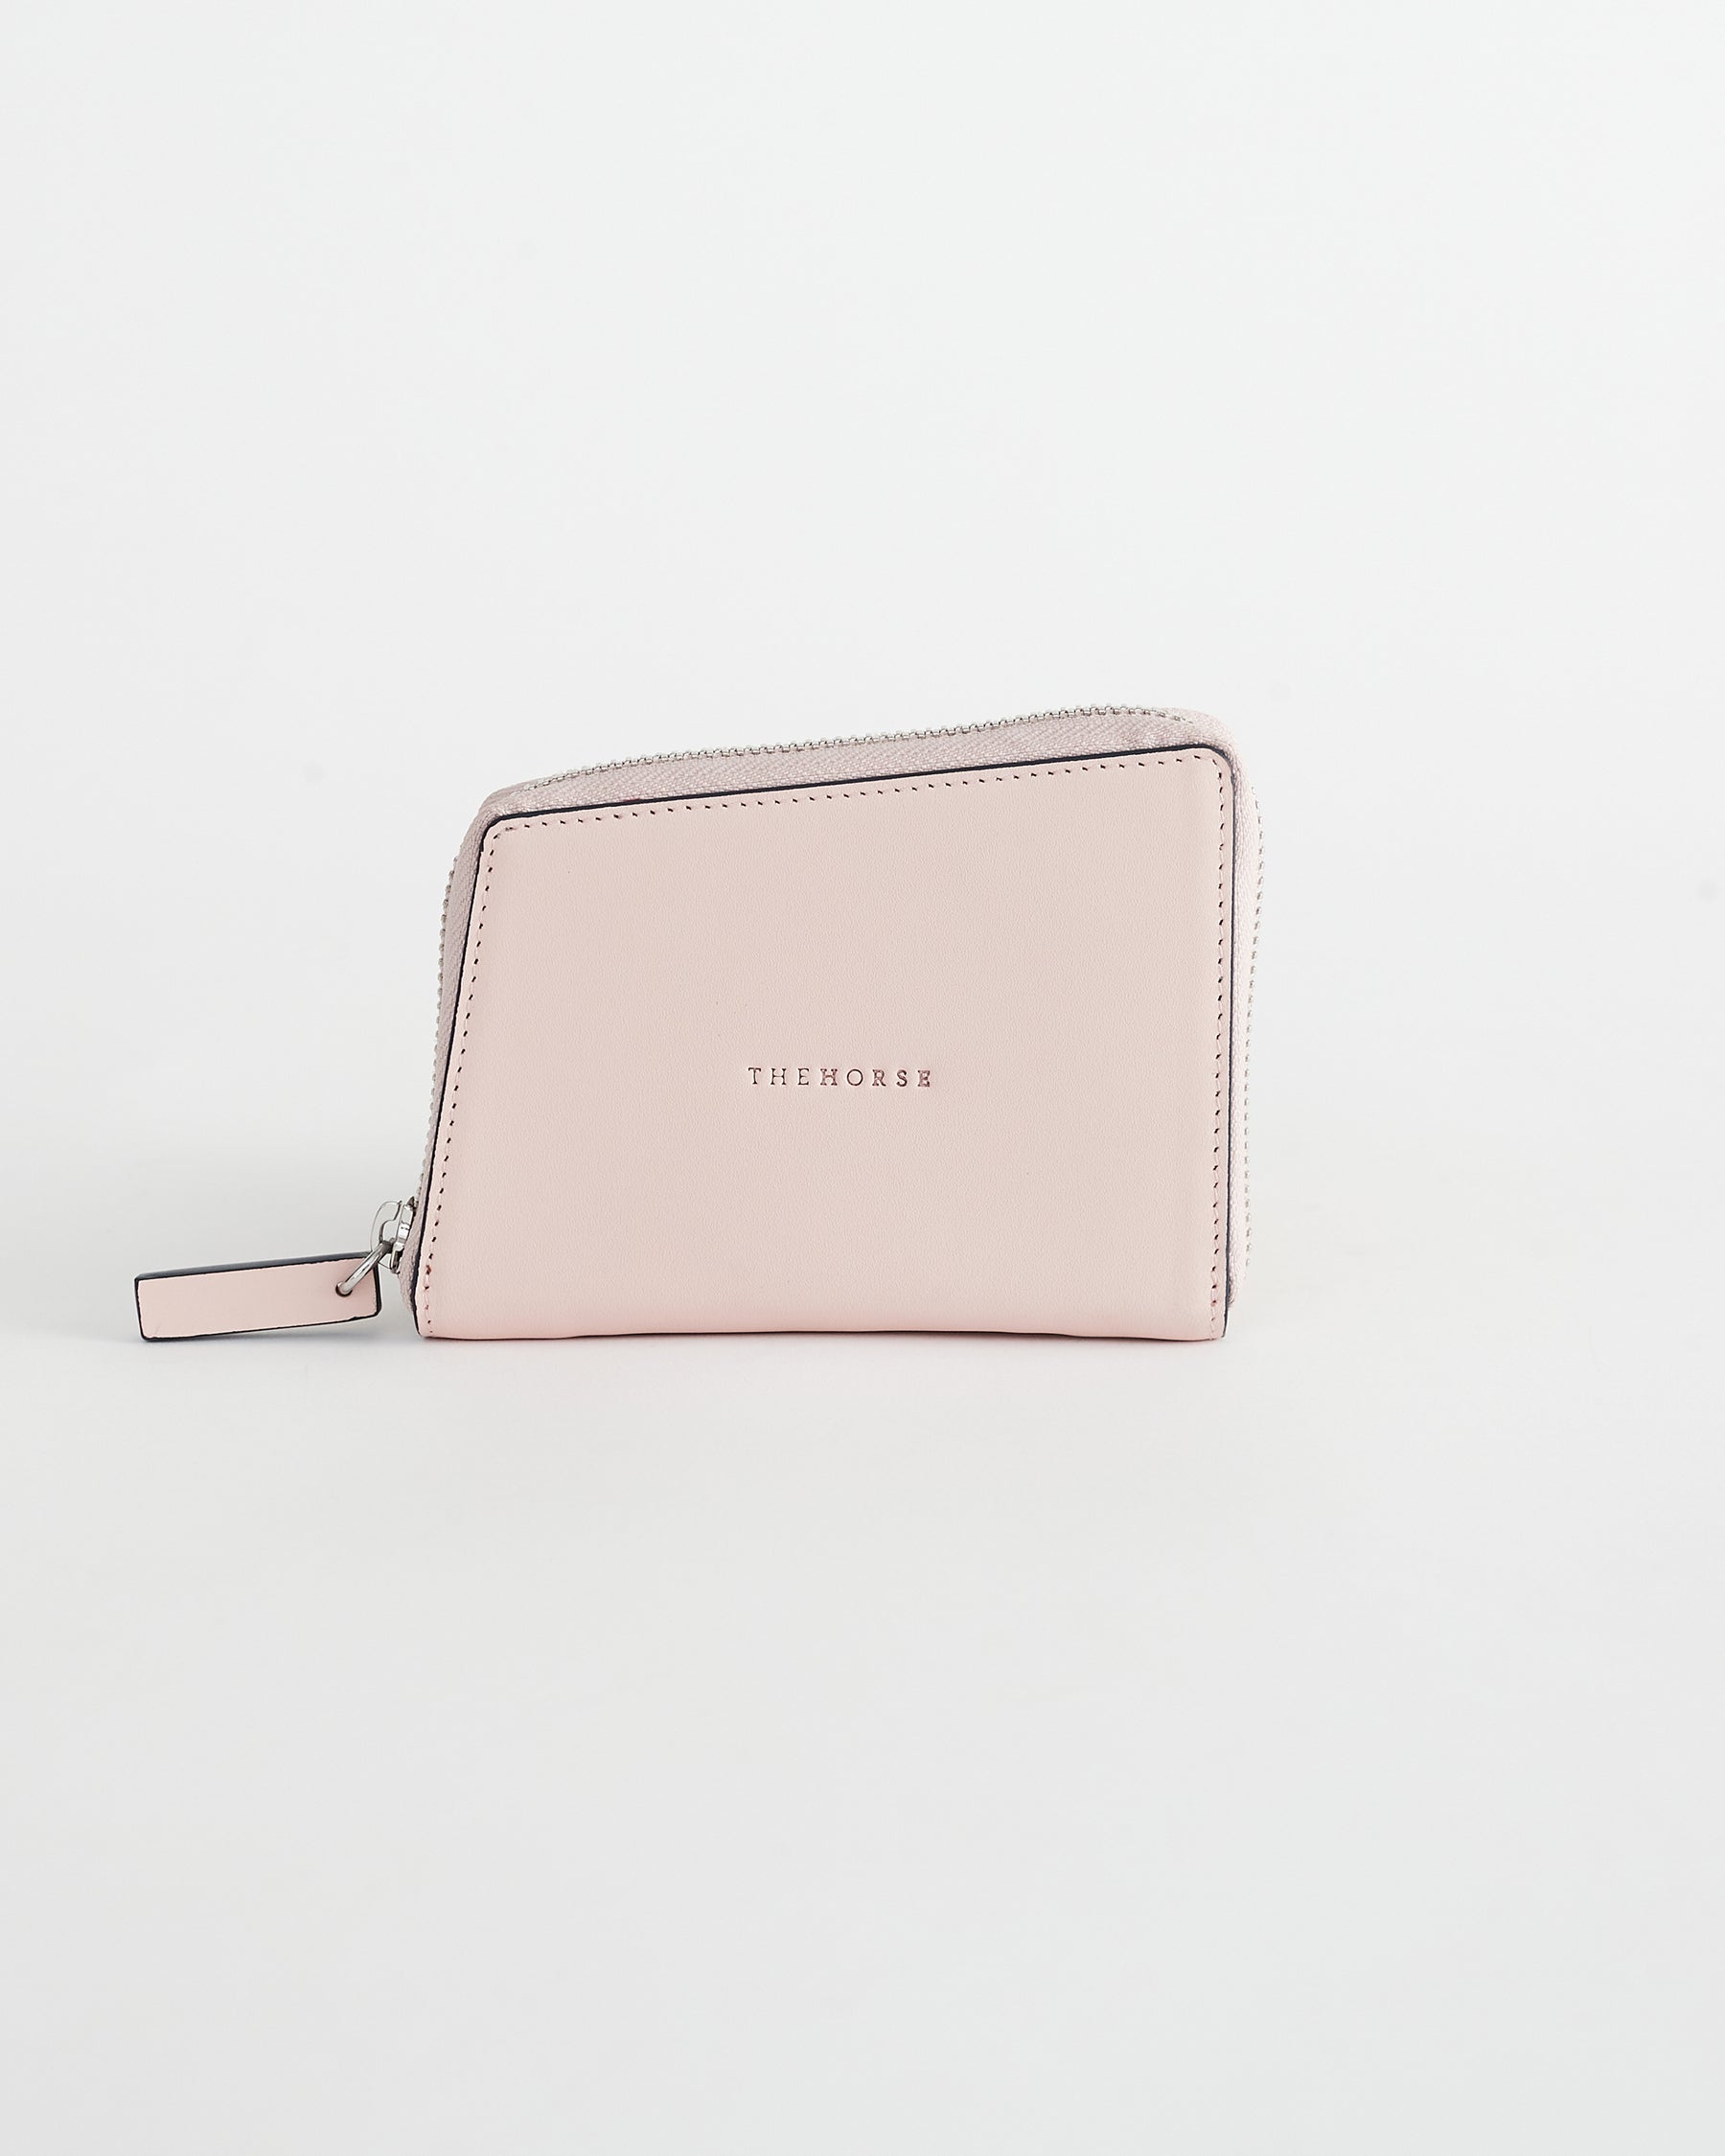 The Bo Women's Compact Leather Zip Wallet in Pink by The Horse®